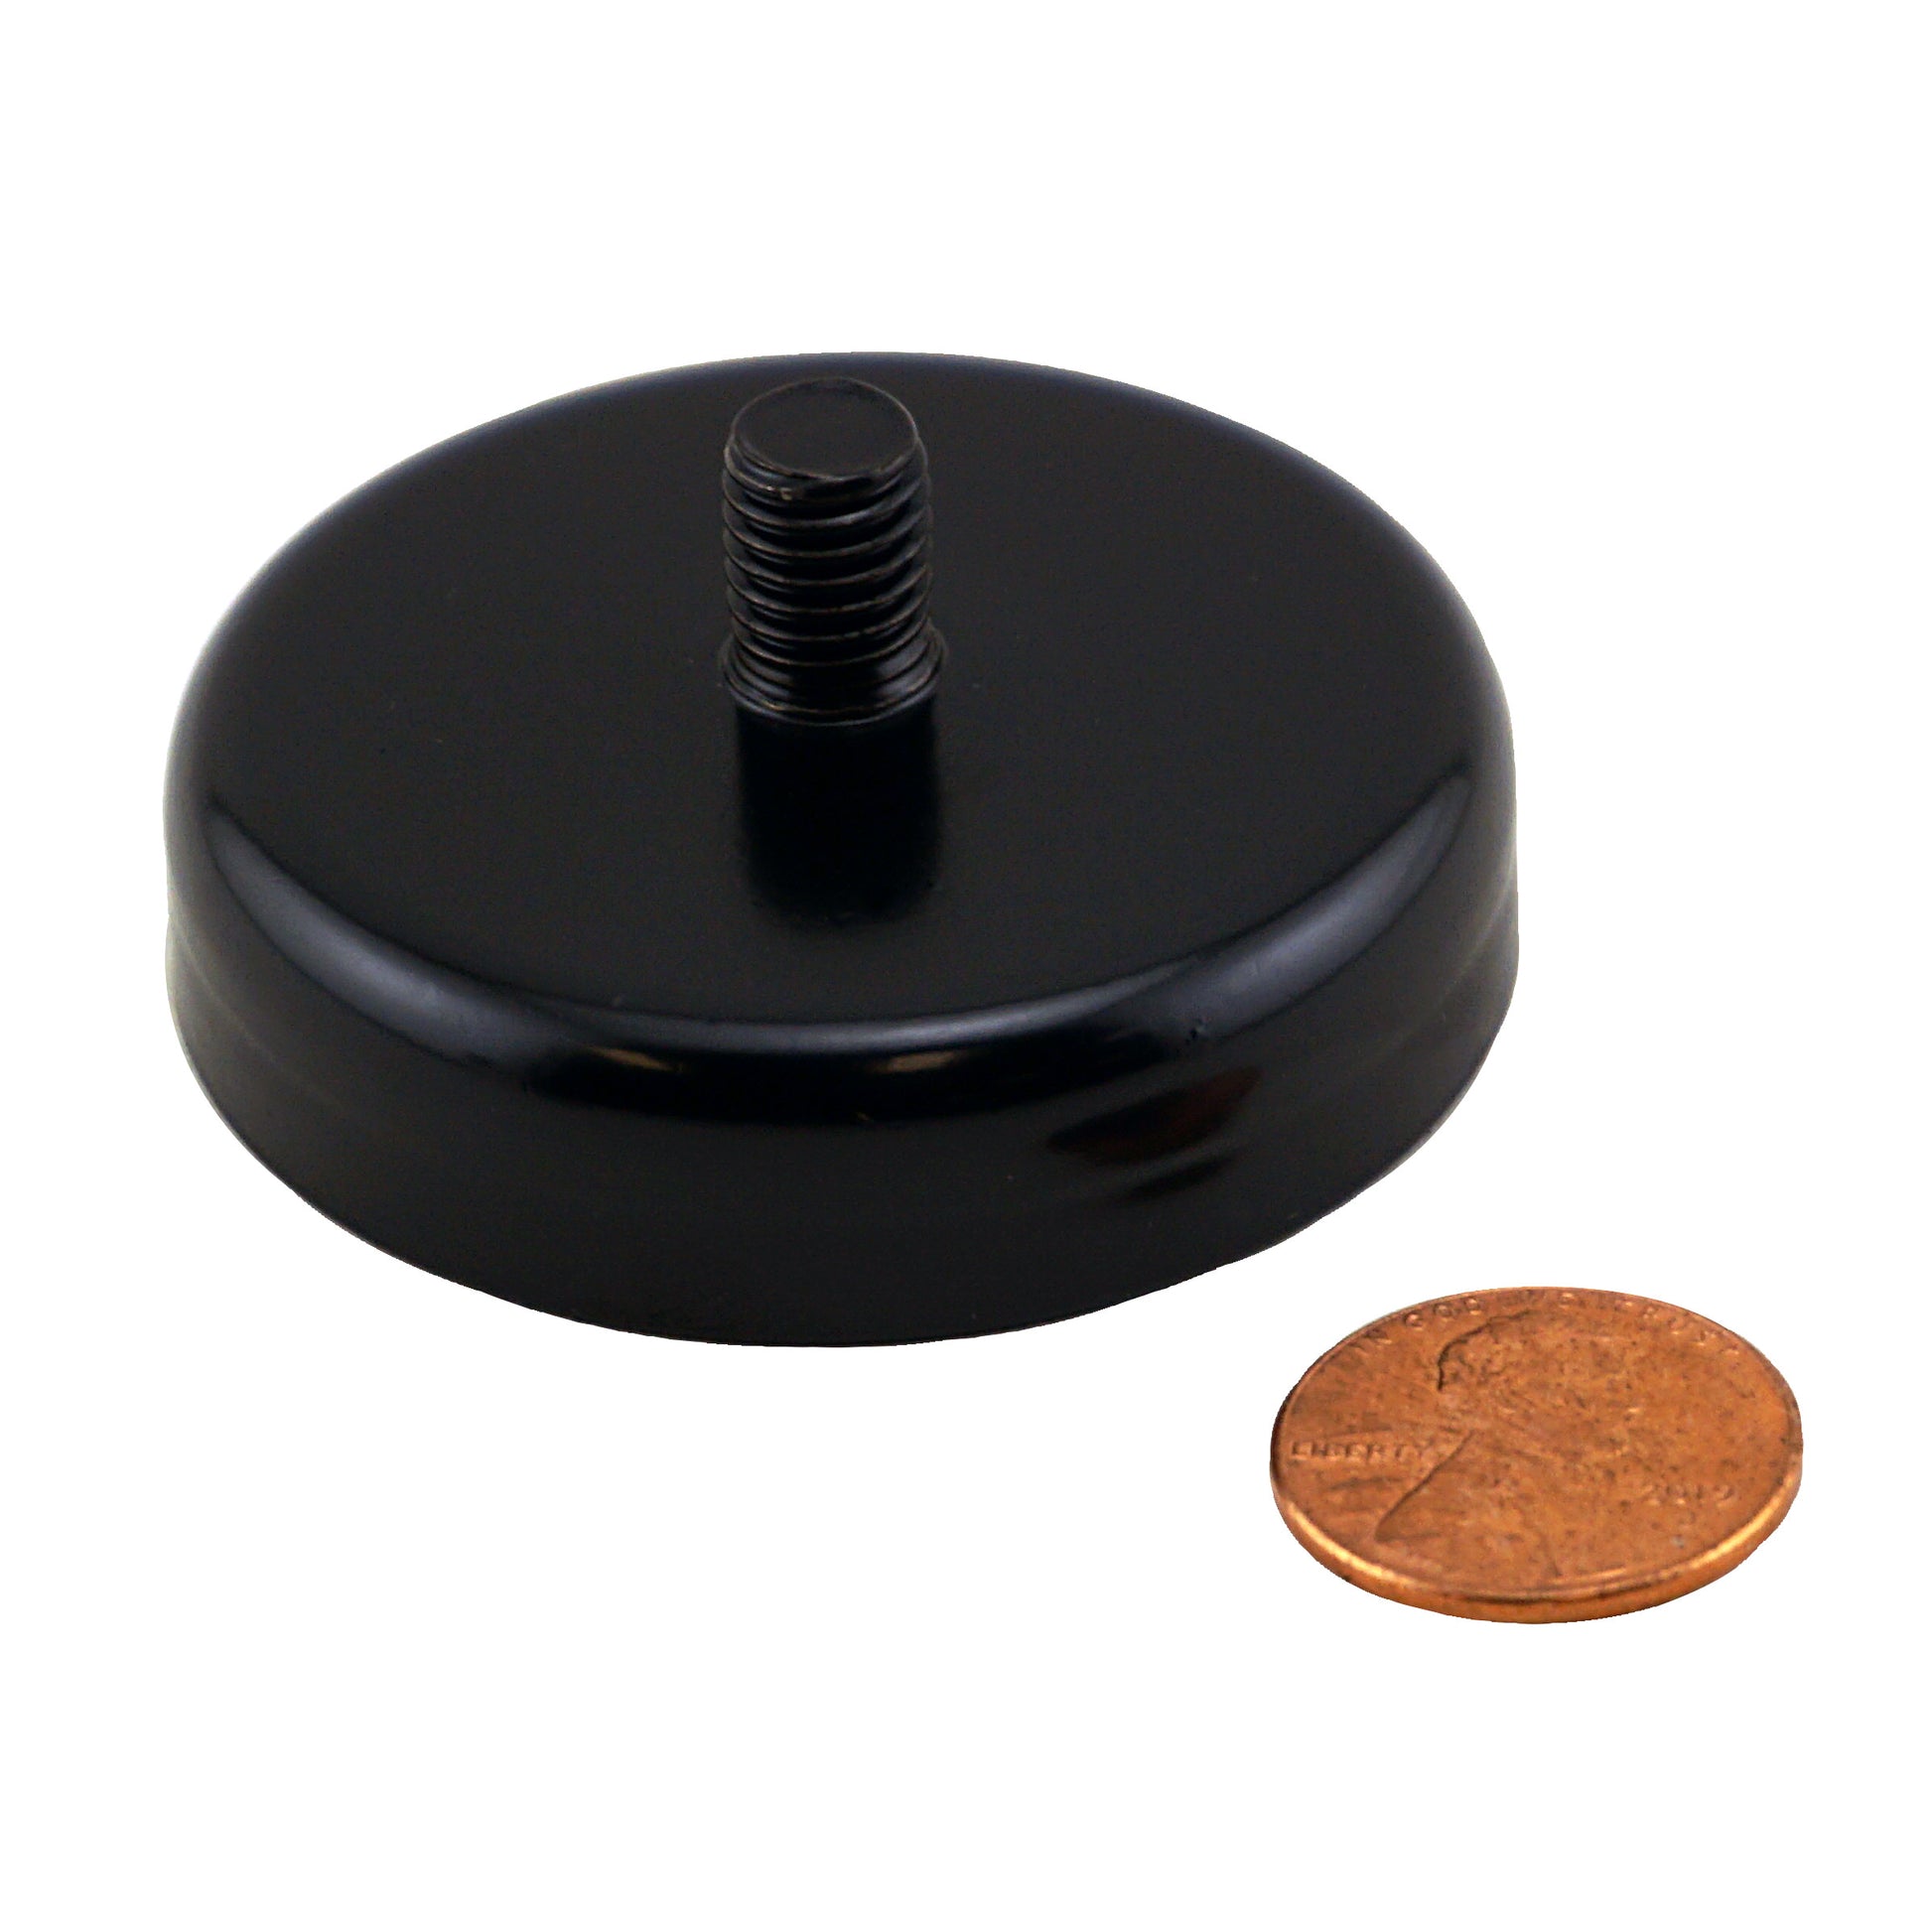 Load image into Gallery viewer, CACM200S01BPC Ceramic Round Base Magnet with Male Thread - Compared to Penny for Size Reference